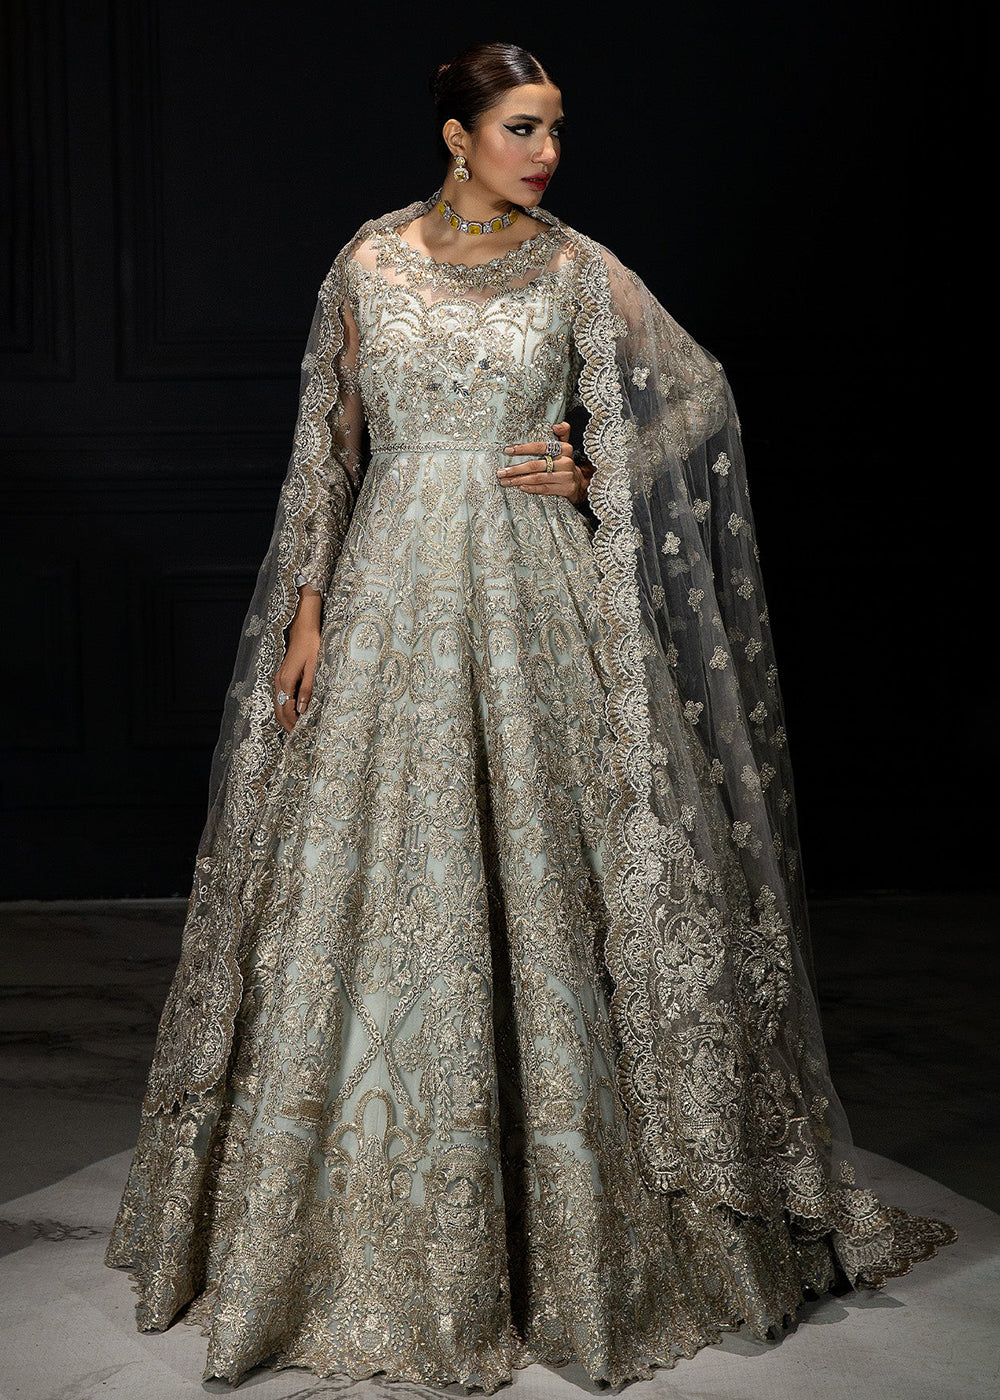 Buy Now Andaaz-E-Khaas Bridal Formals 2023 by Imrozia | IB-48 Jaeda Online at Empress Online in USA, UK, Canada & Worldwide at Empress Clothing. 